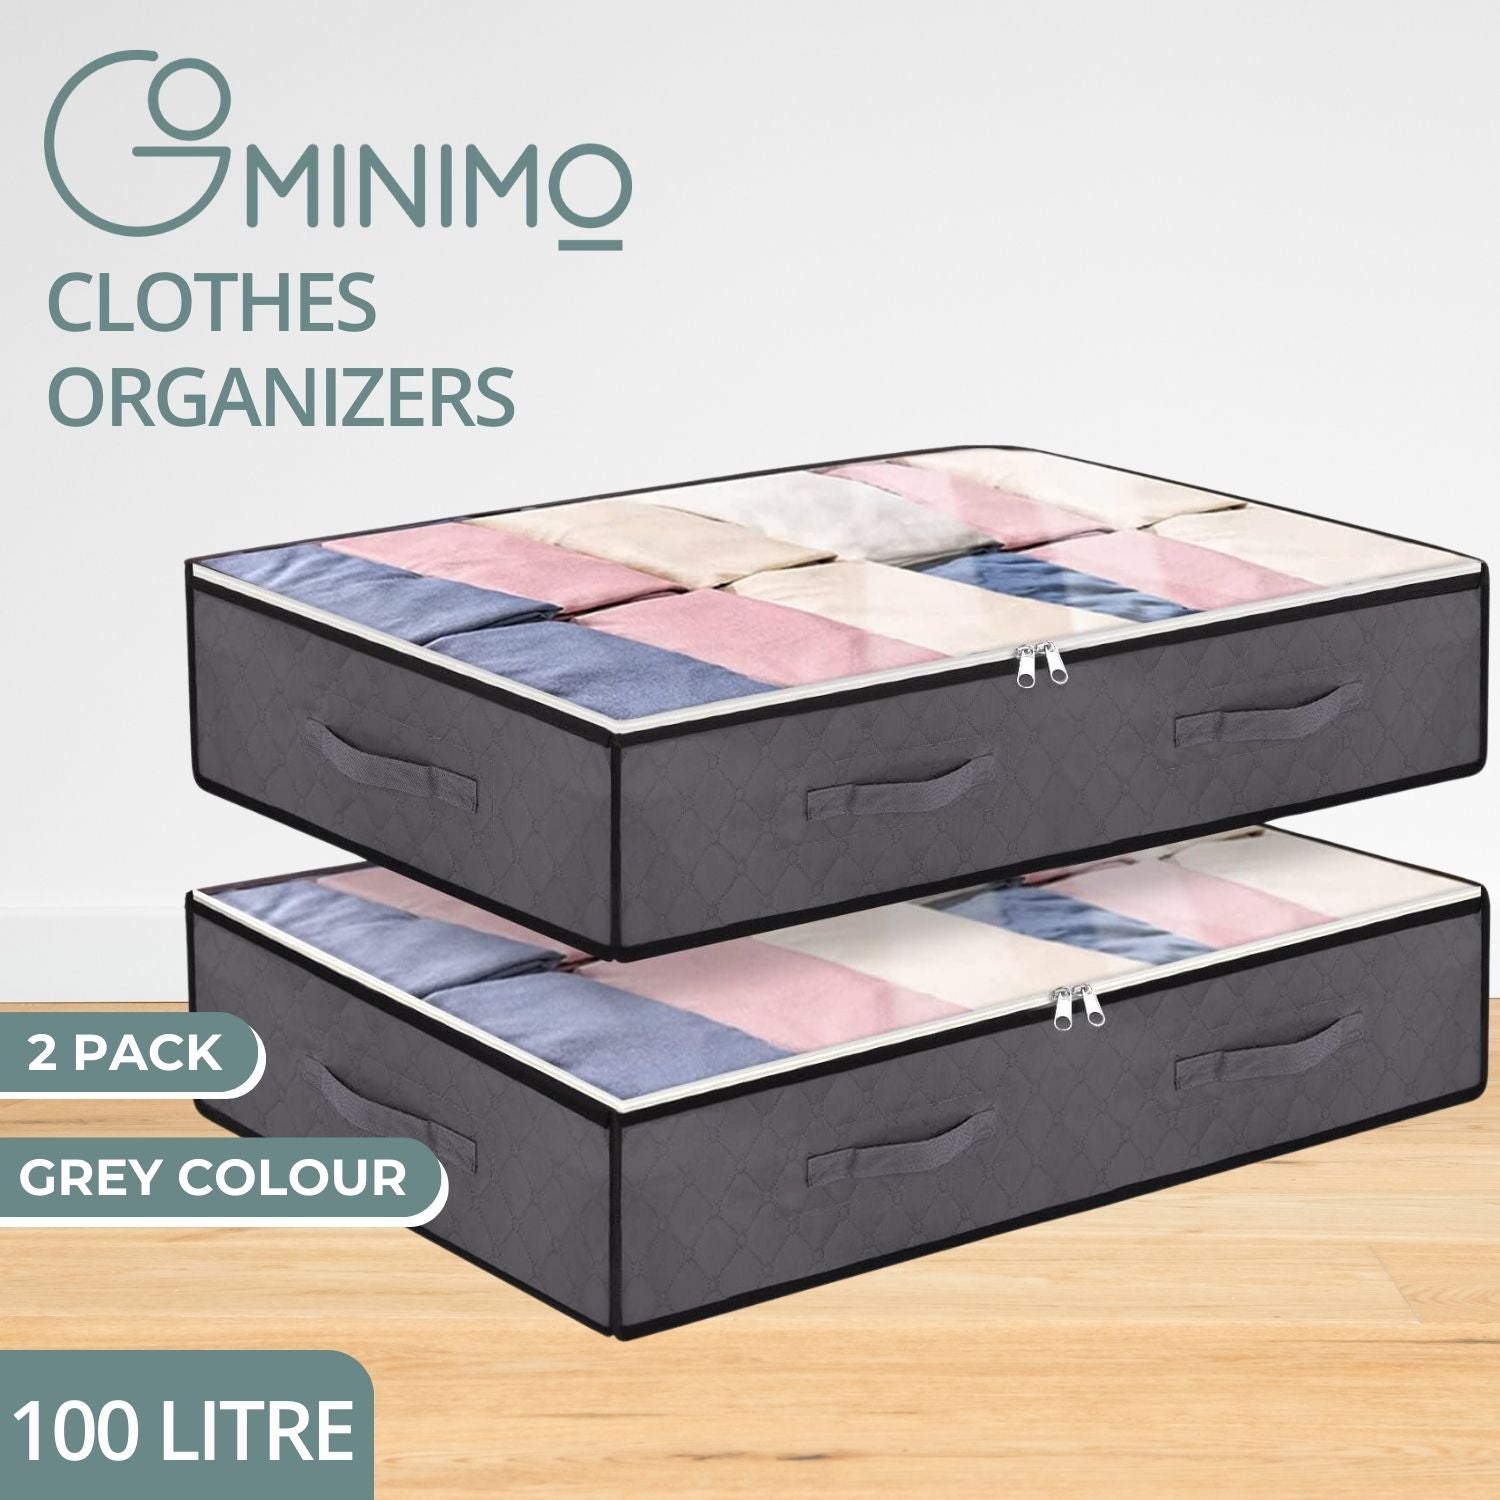 GOMINIMO 2 Pack 100L Large Underbed Clothes Storage Bag Home Organizer Box Bag